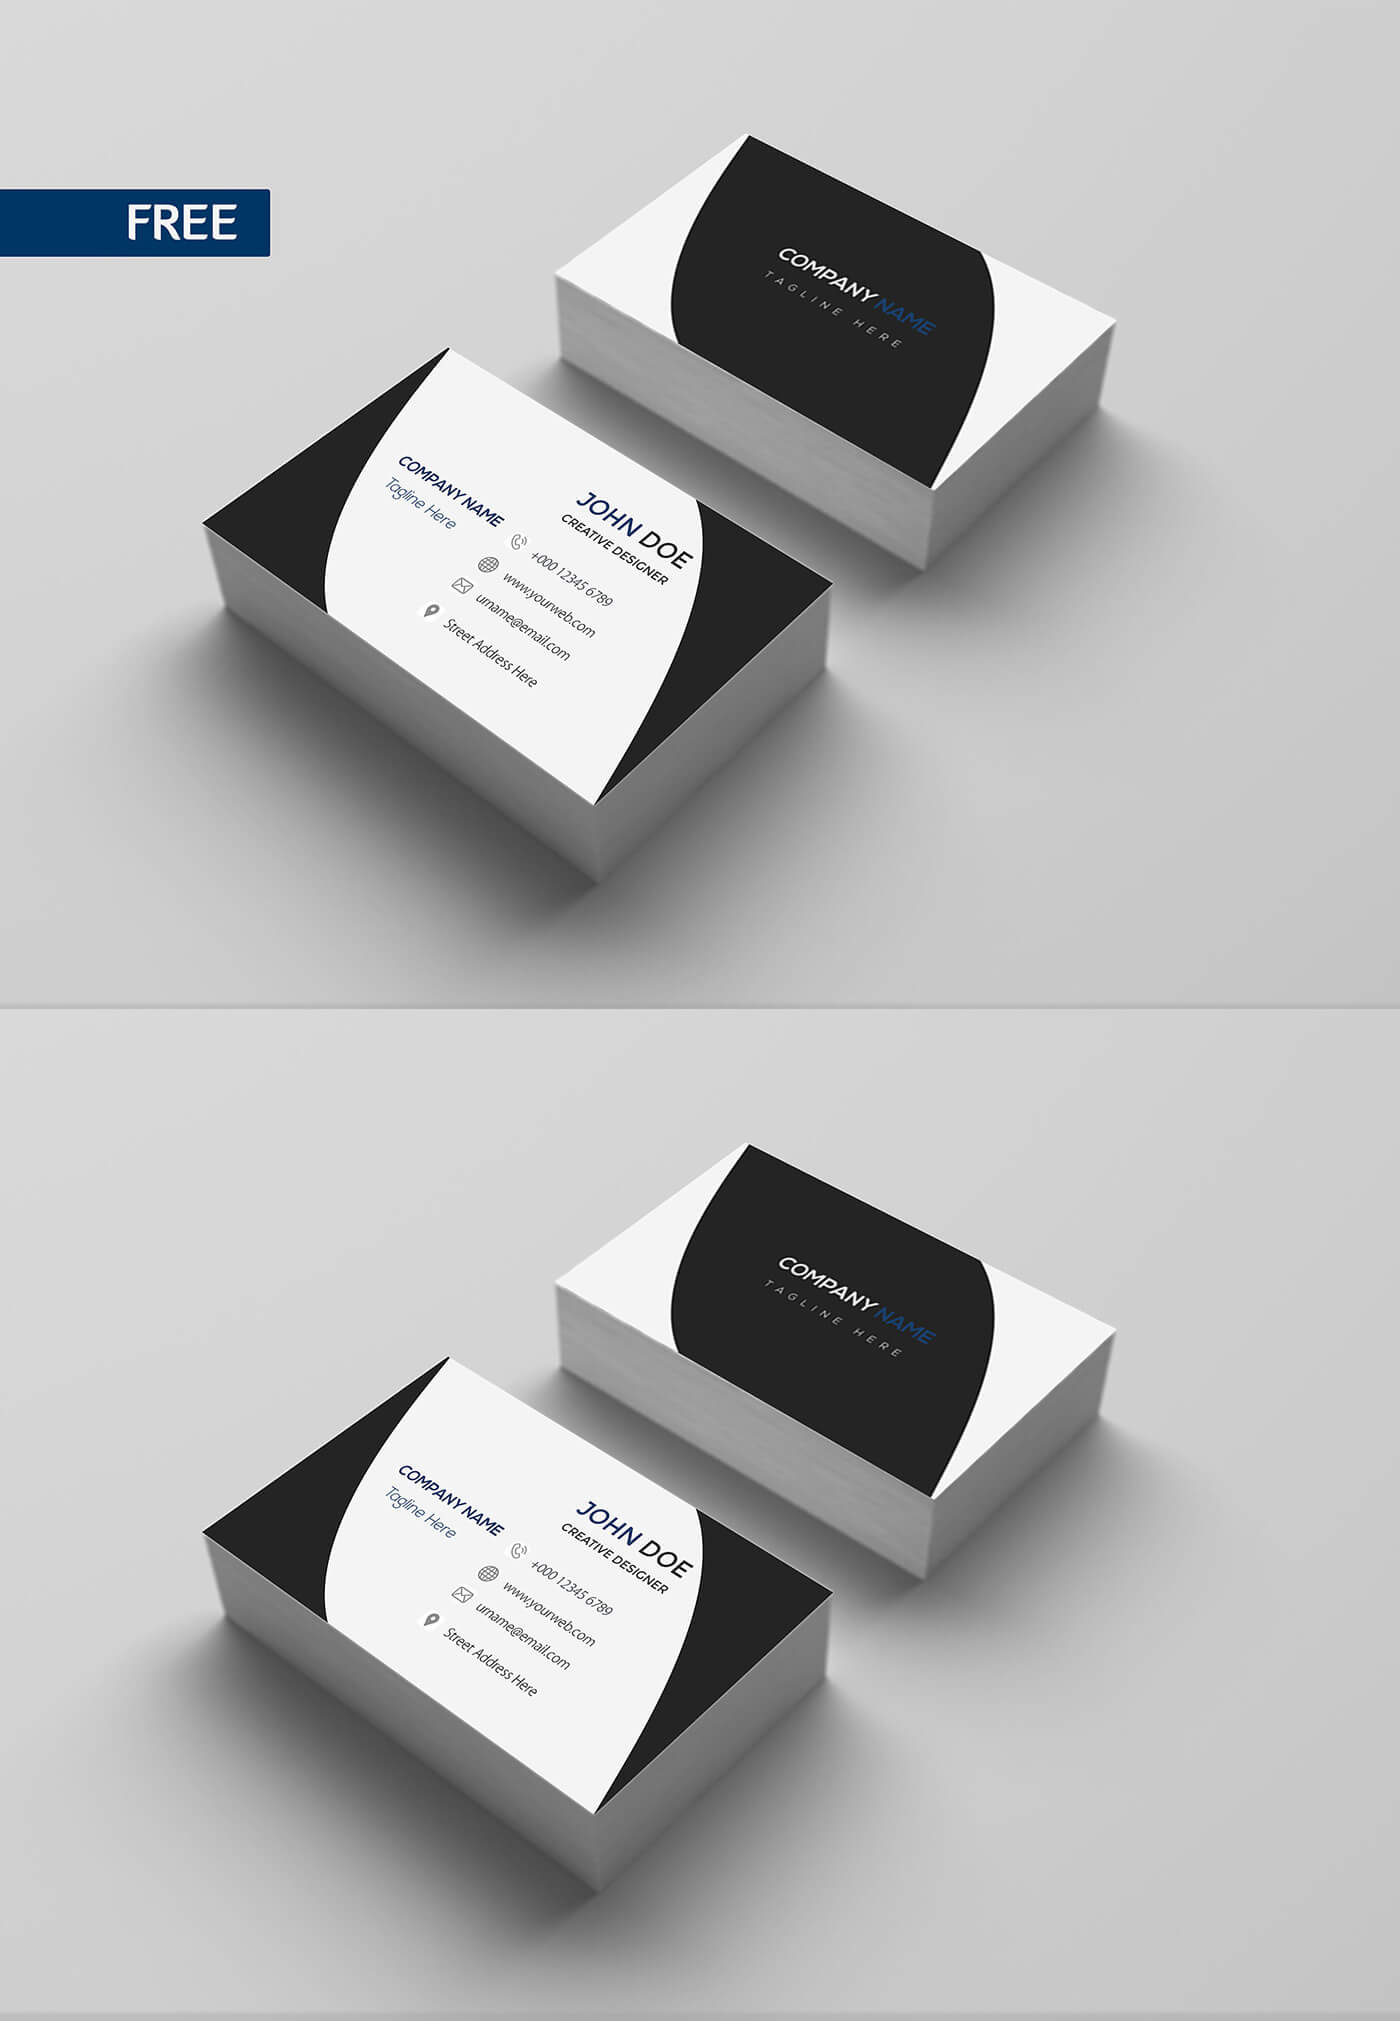 Free Print Design Business Card Template On Behance In Template For Cards To Print Free